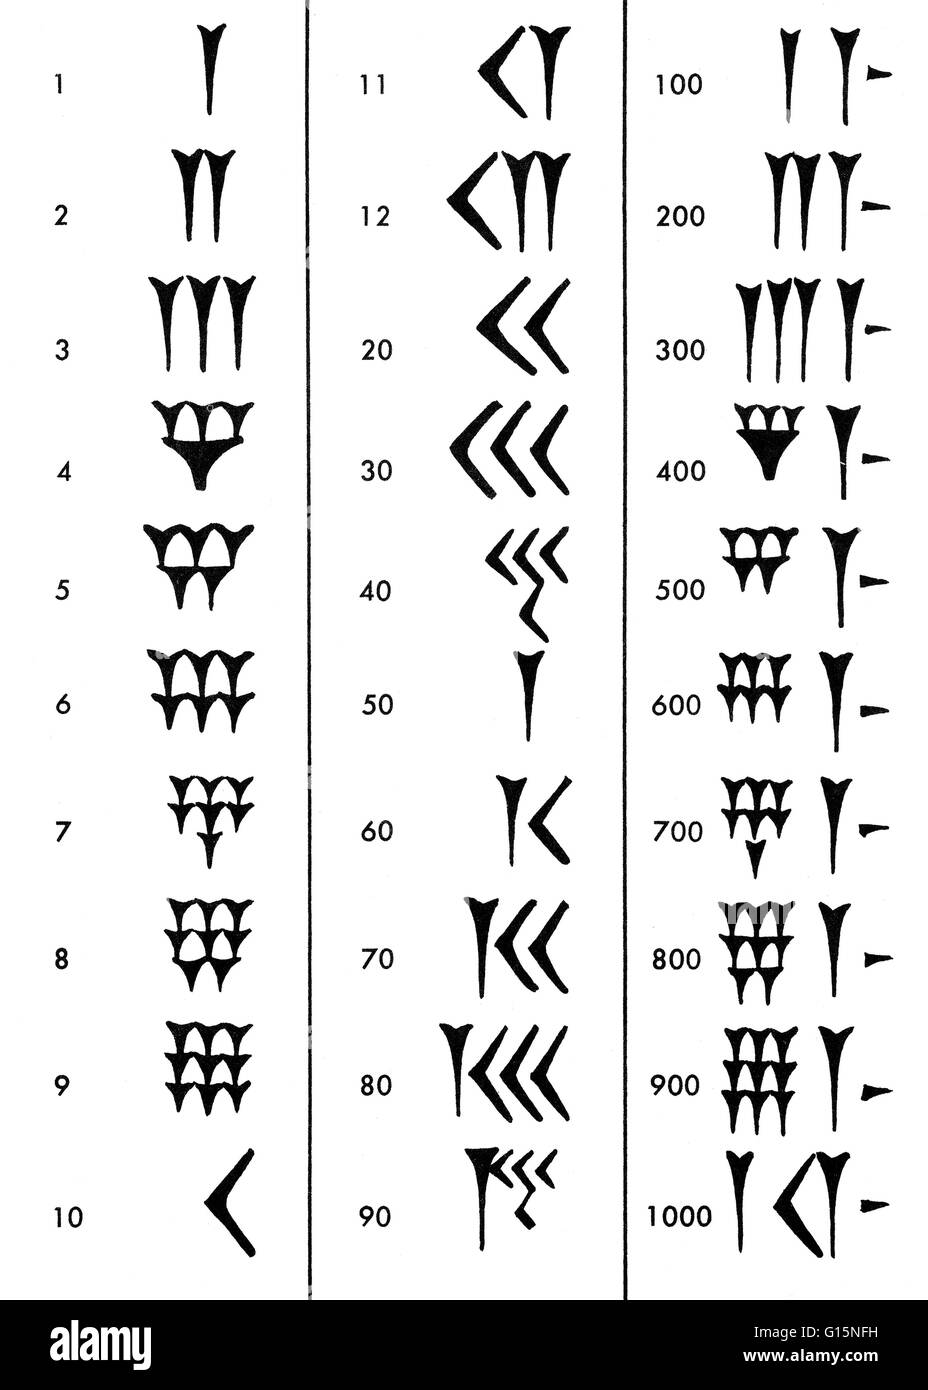 The Sumerians used a numerical system based on 1, 10 and 60. The way of writing a number like 70 would be the sign for 60 and the sign for 10 right after. This way of counting is still used today for measuring time as 60 seconds per minute and 60 minutes Stock Photo